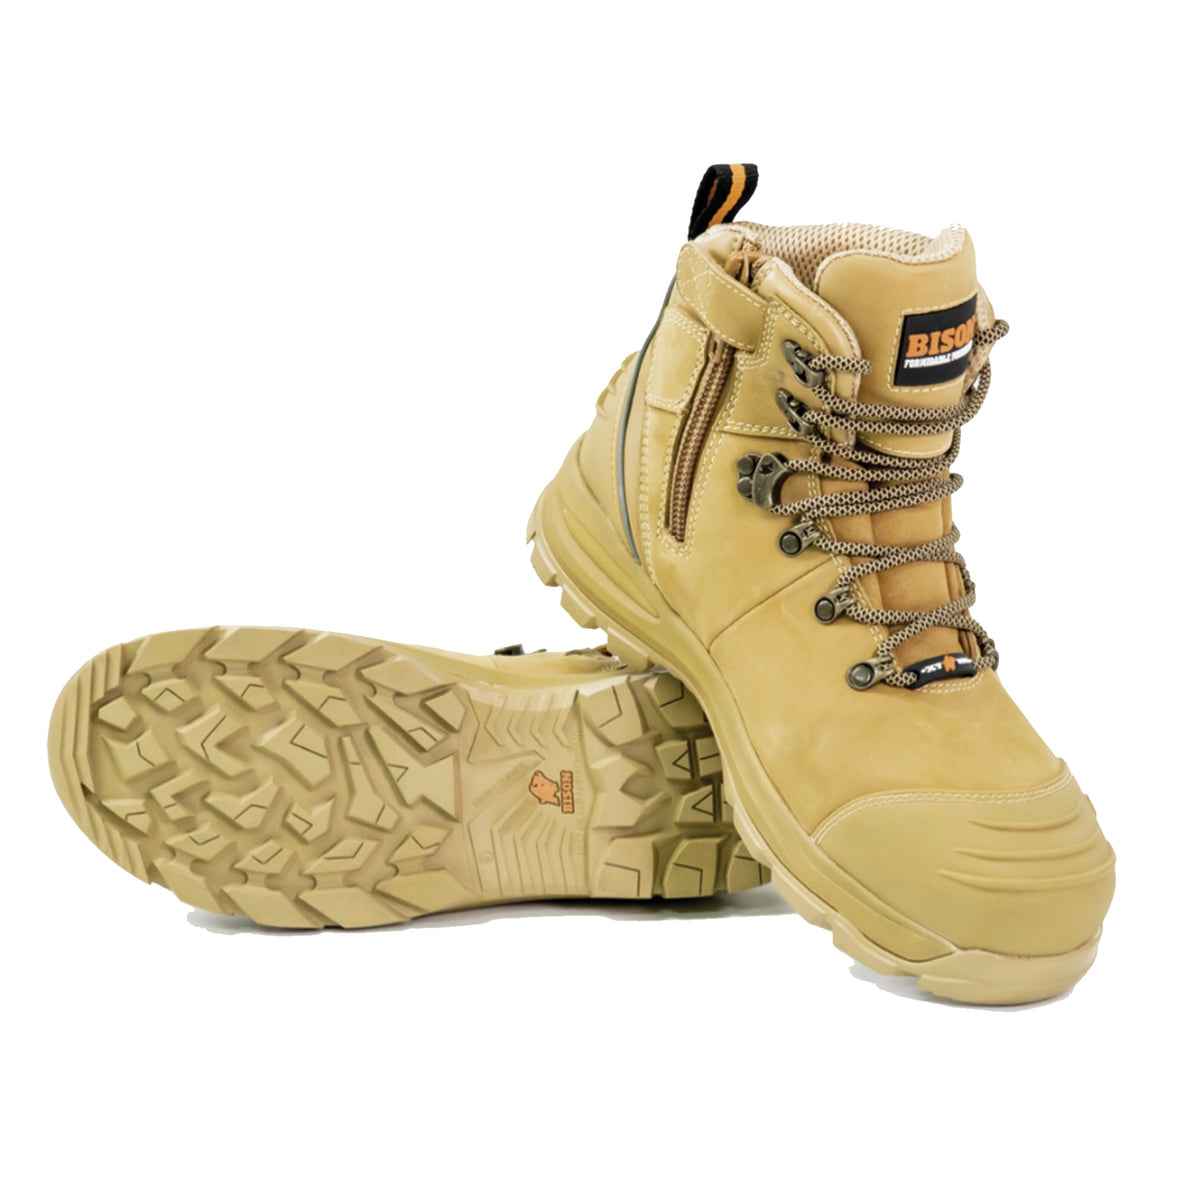 bison xt safety boot in wheat